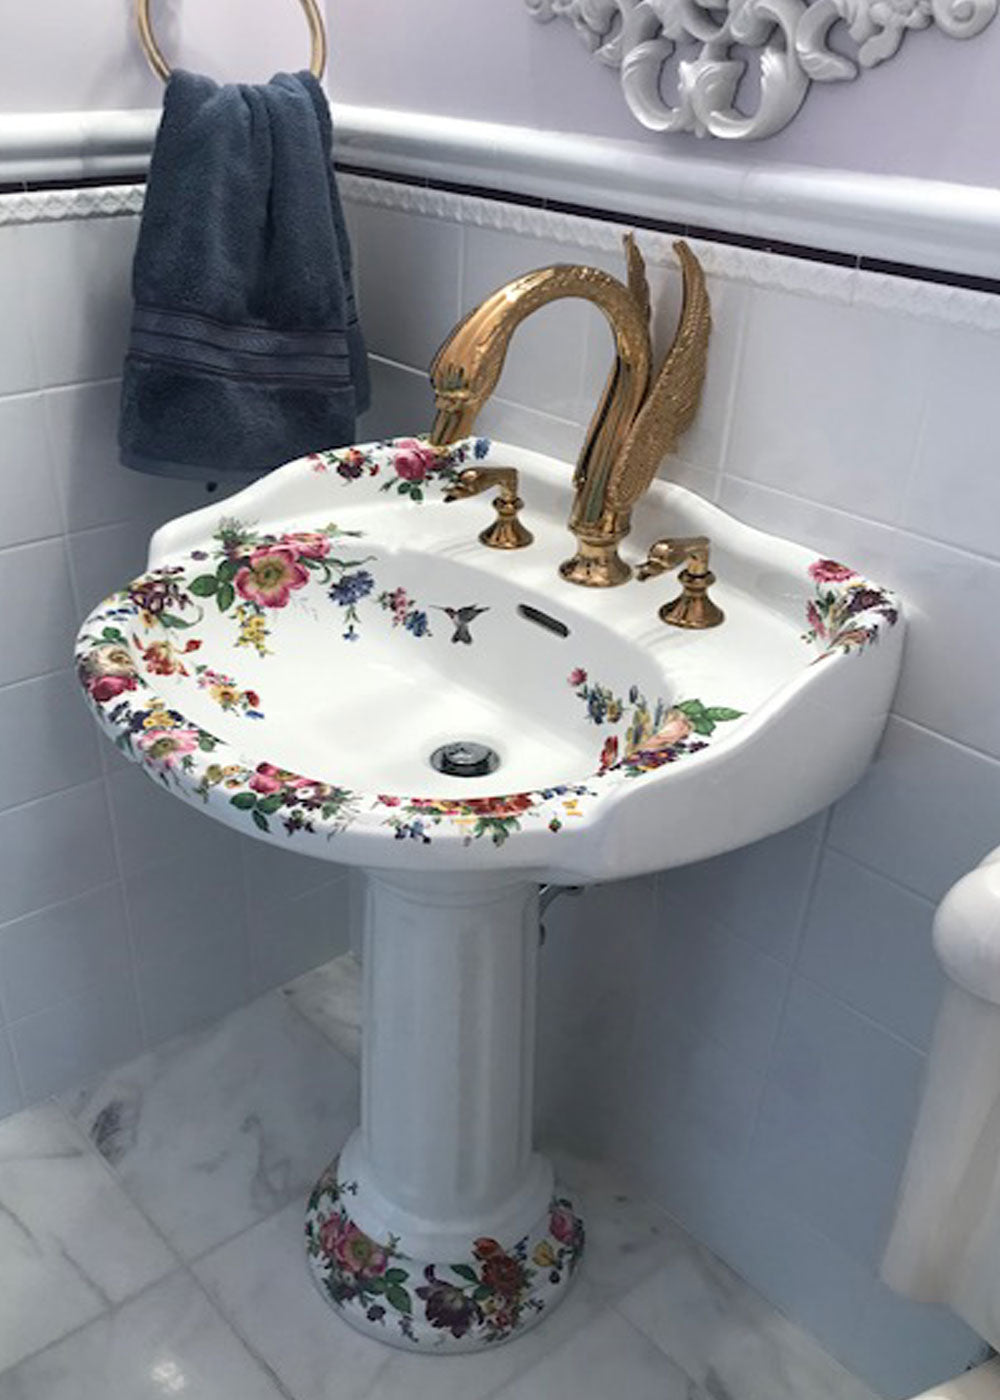 Powder Room Pedestal sink painted with flowers and swan faucets